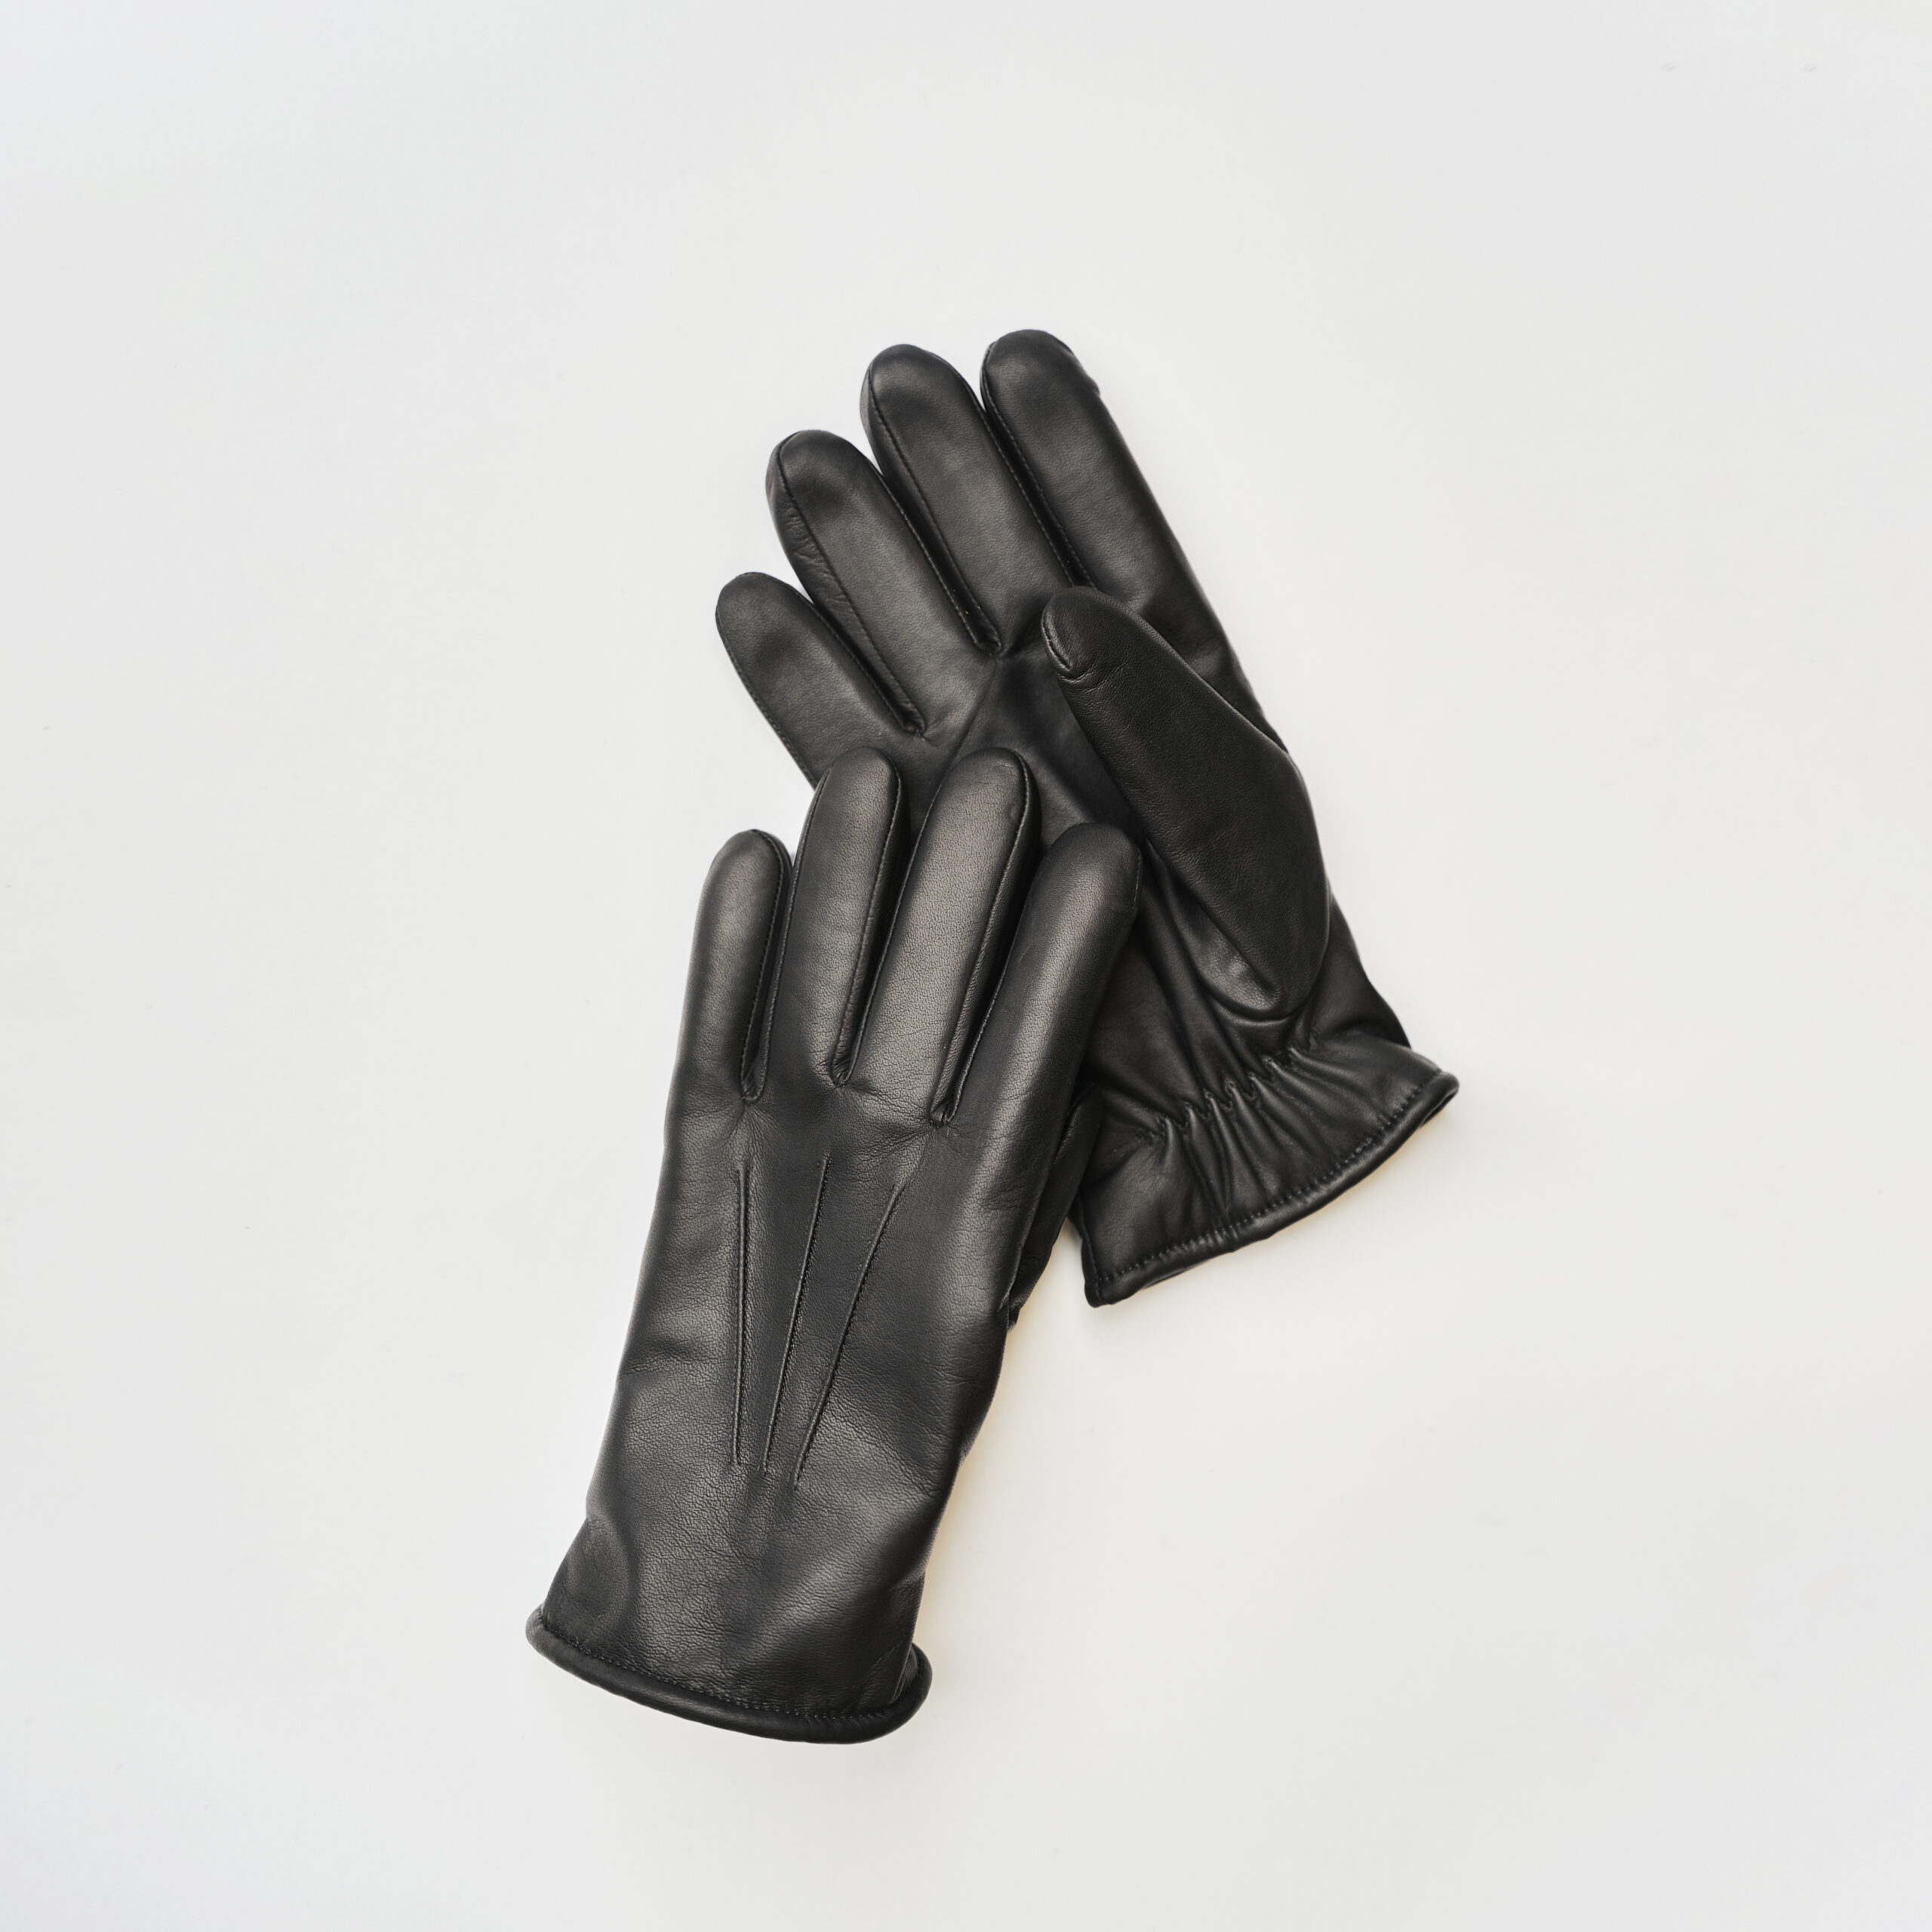 Lined Men's and Ladies Dress Gloves